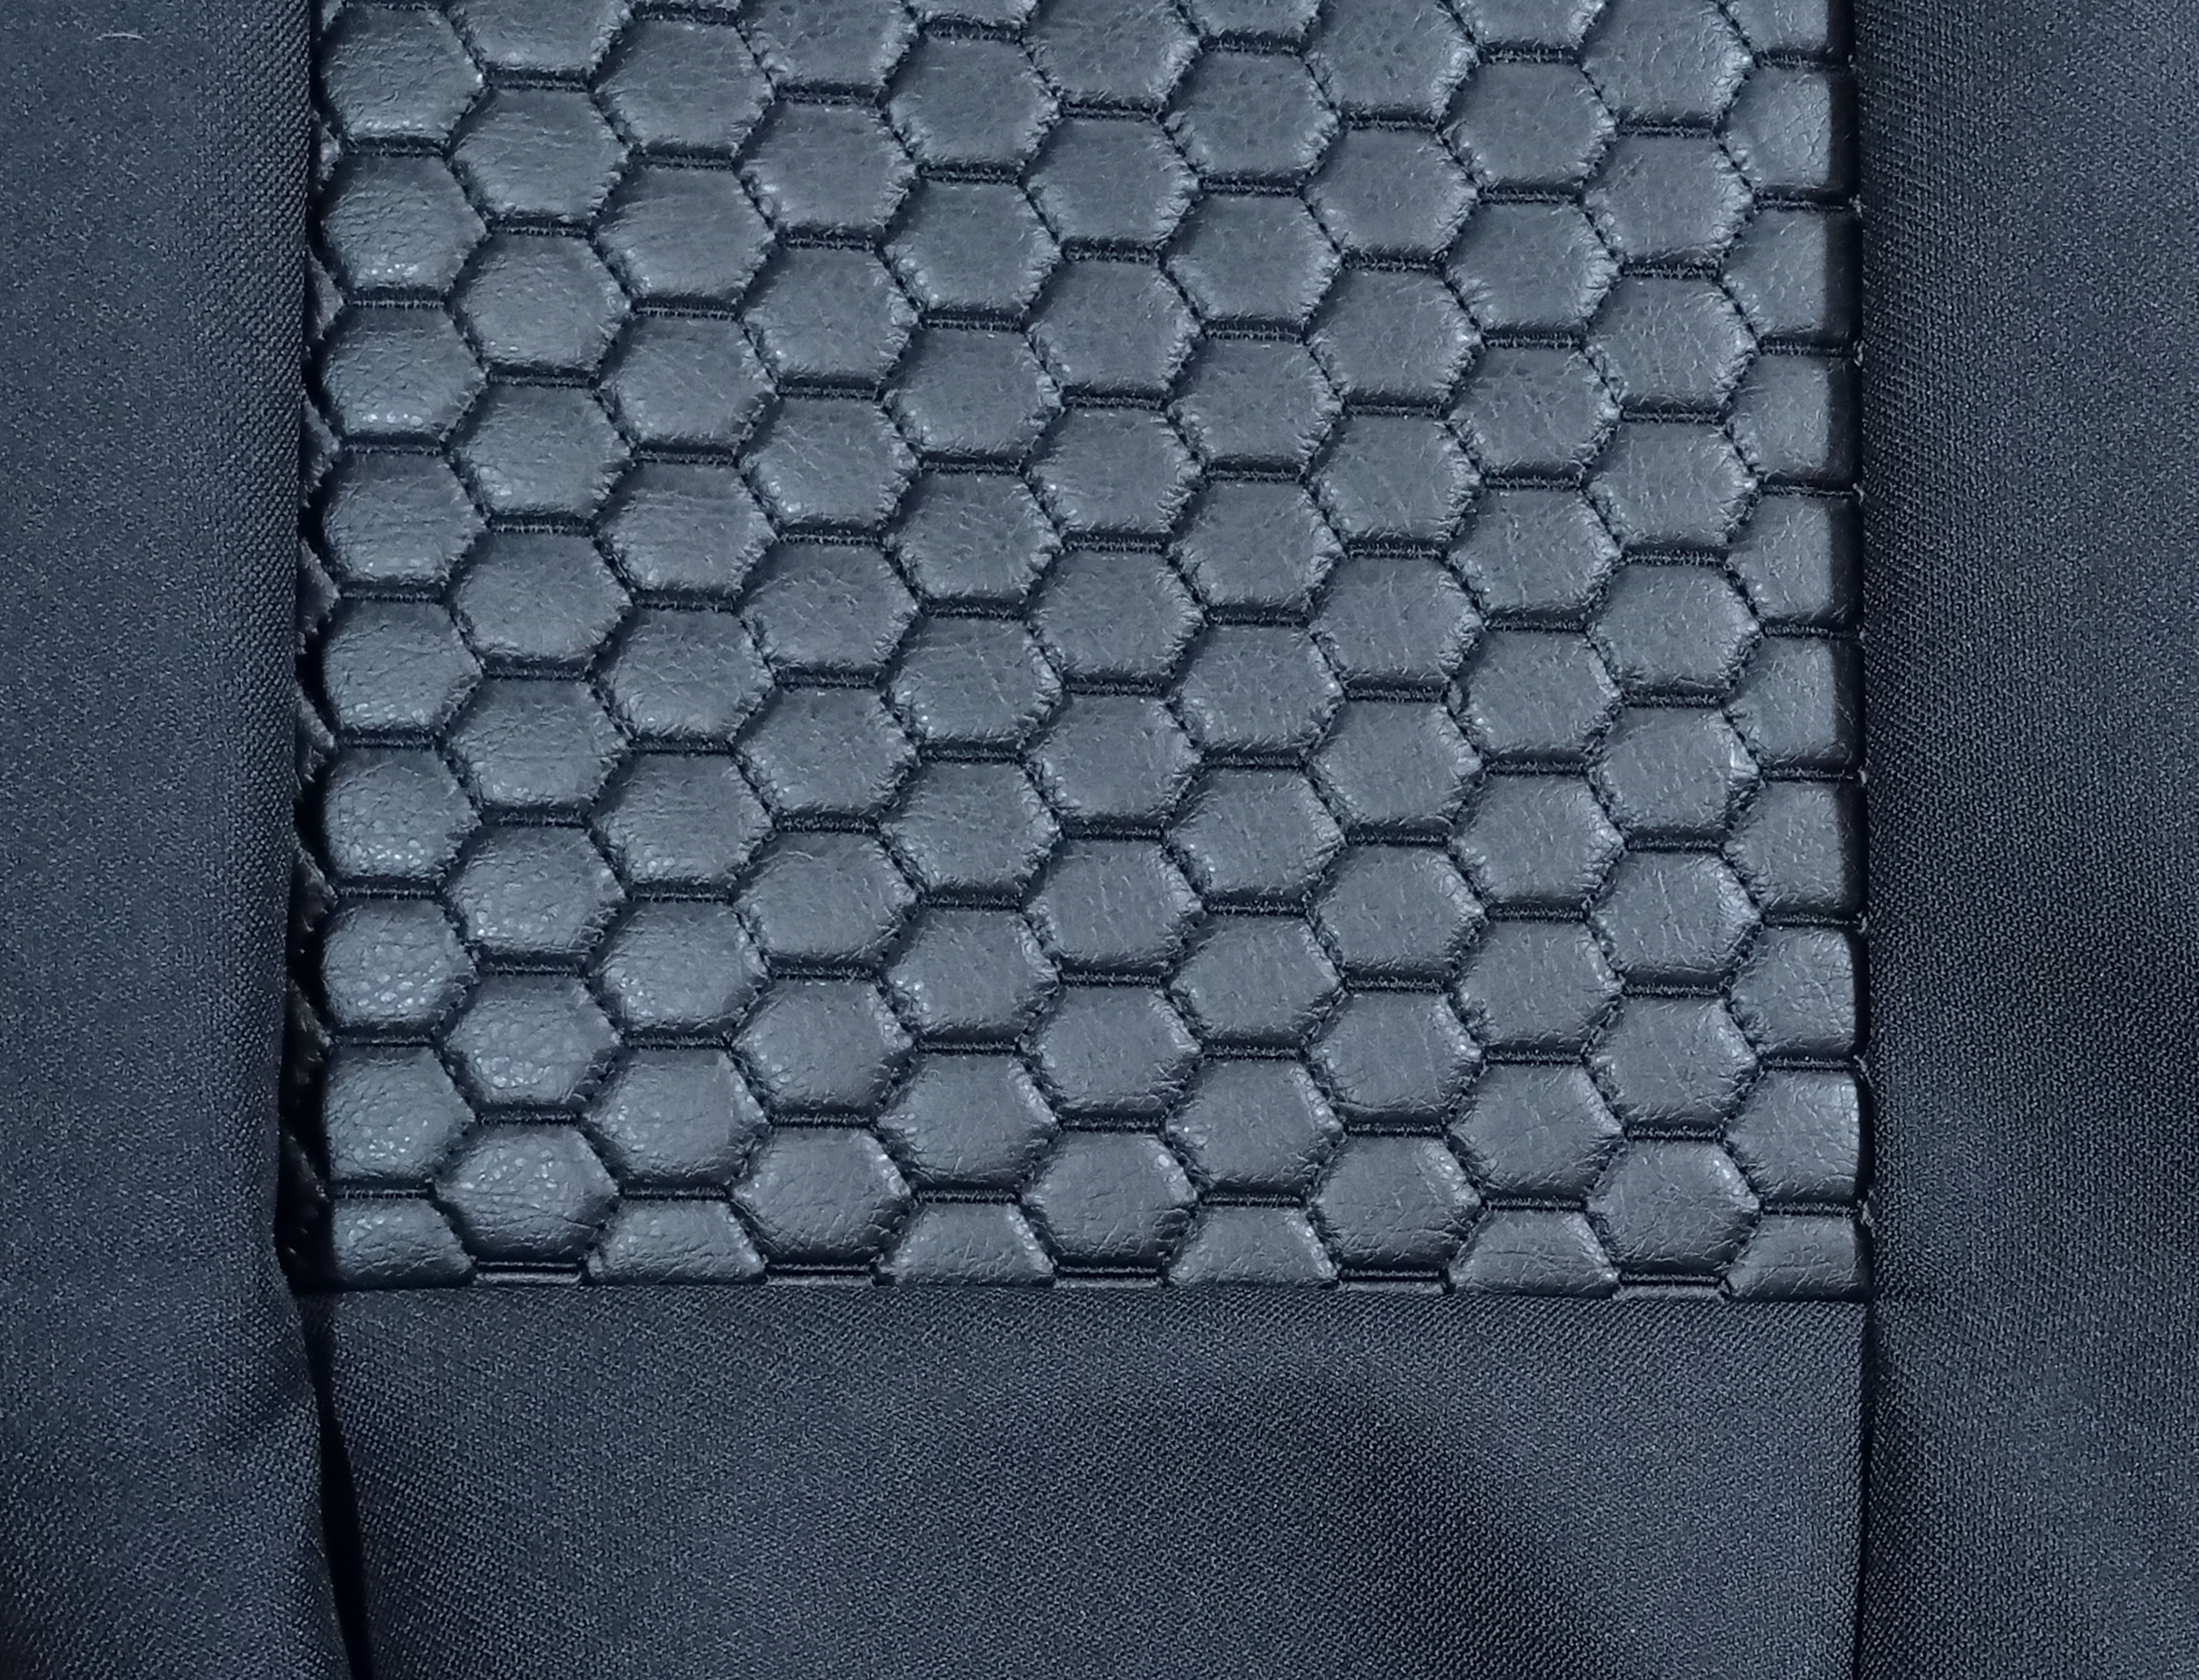 Seat covers for VW TRANSPORTER T5 Van Black Leather